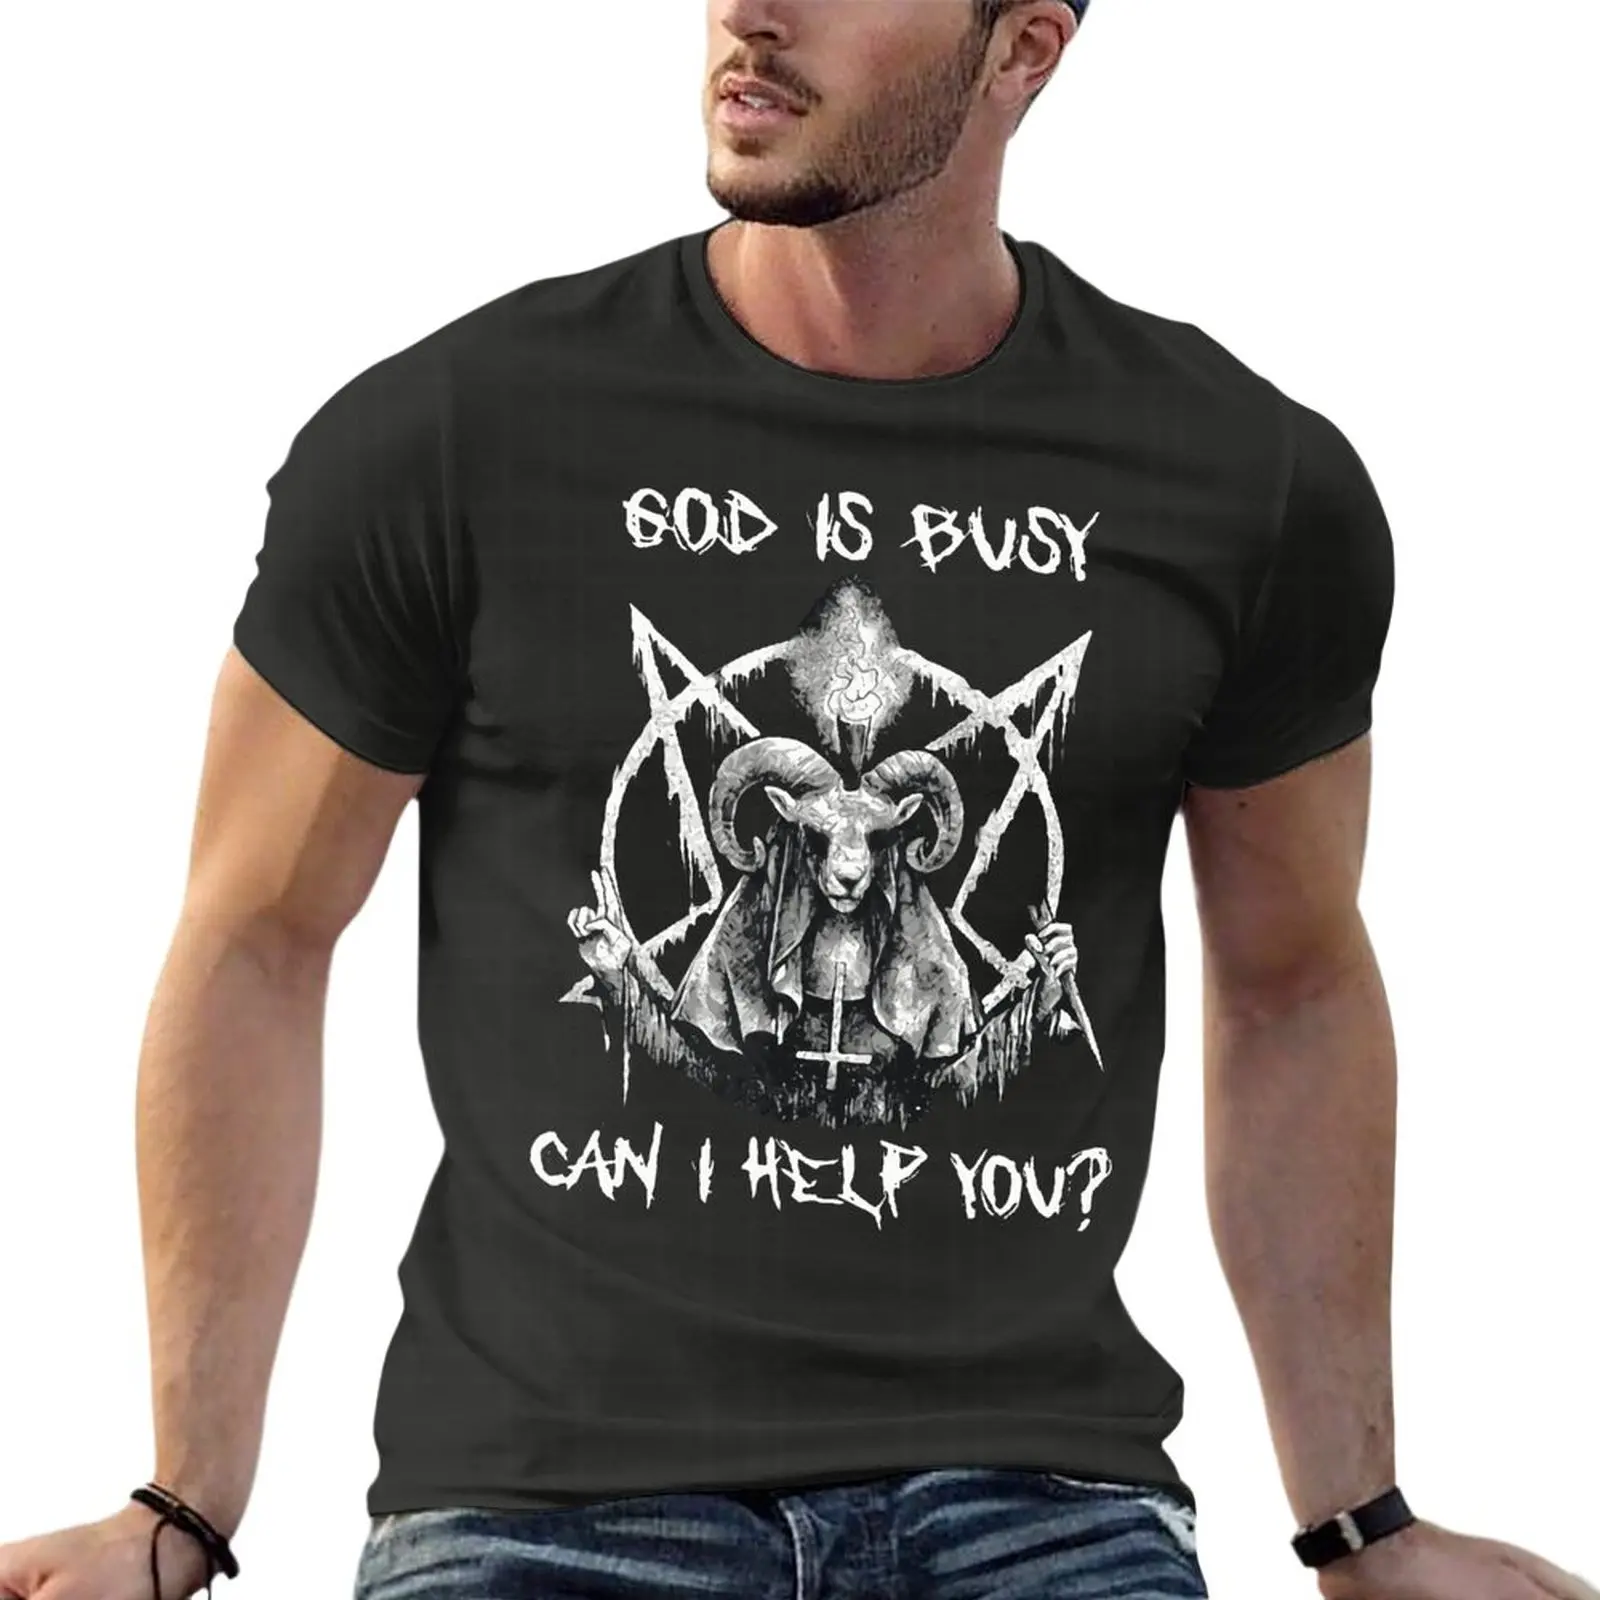 

Details About Satan God Is Busy Can I Help You Oversized T Shirts Branded Mens Clothing Short Sleeve Streetwear Tops Tee